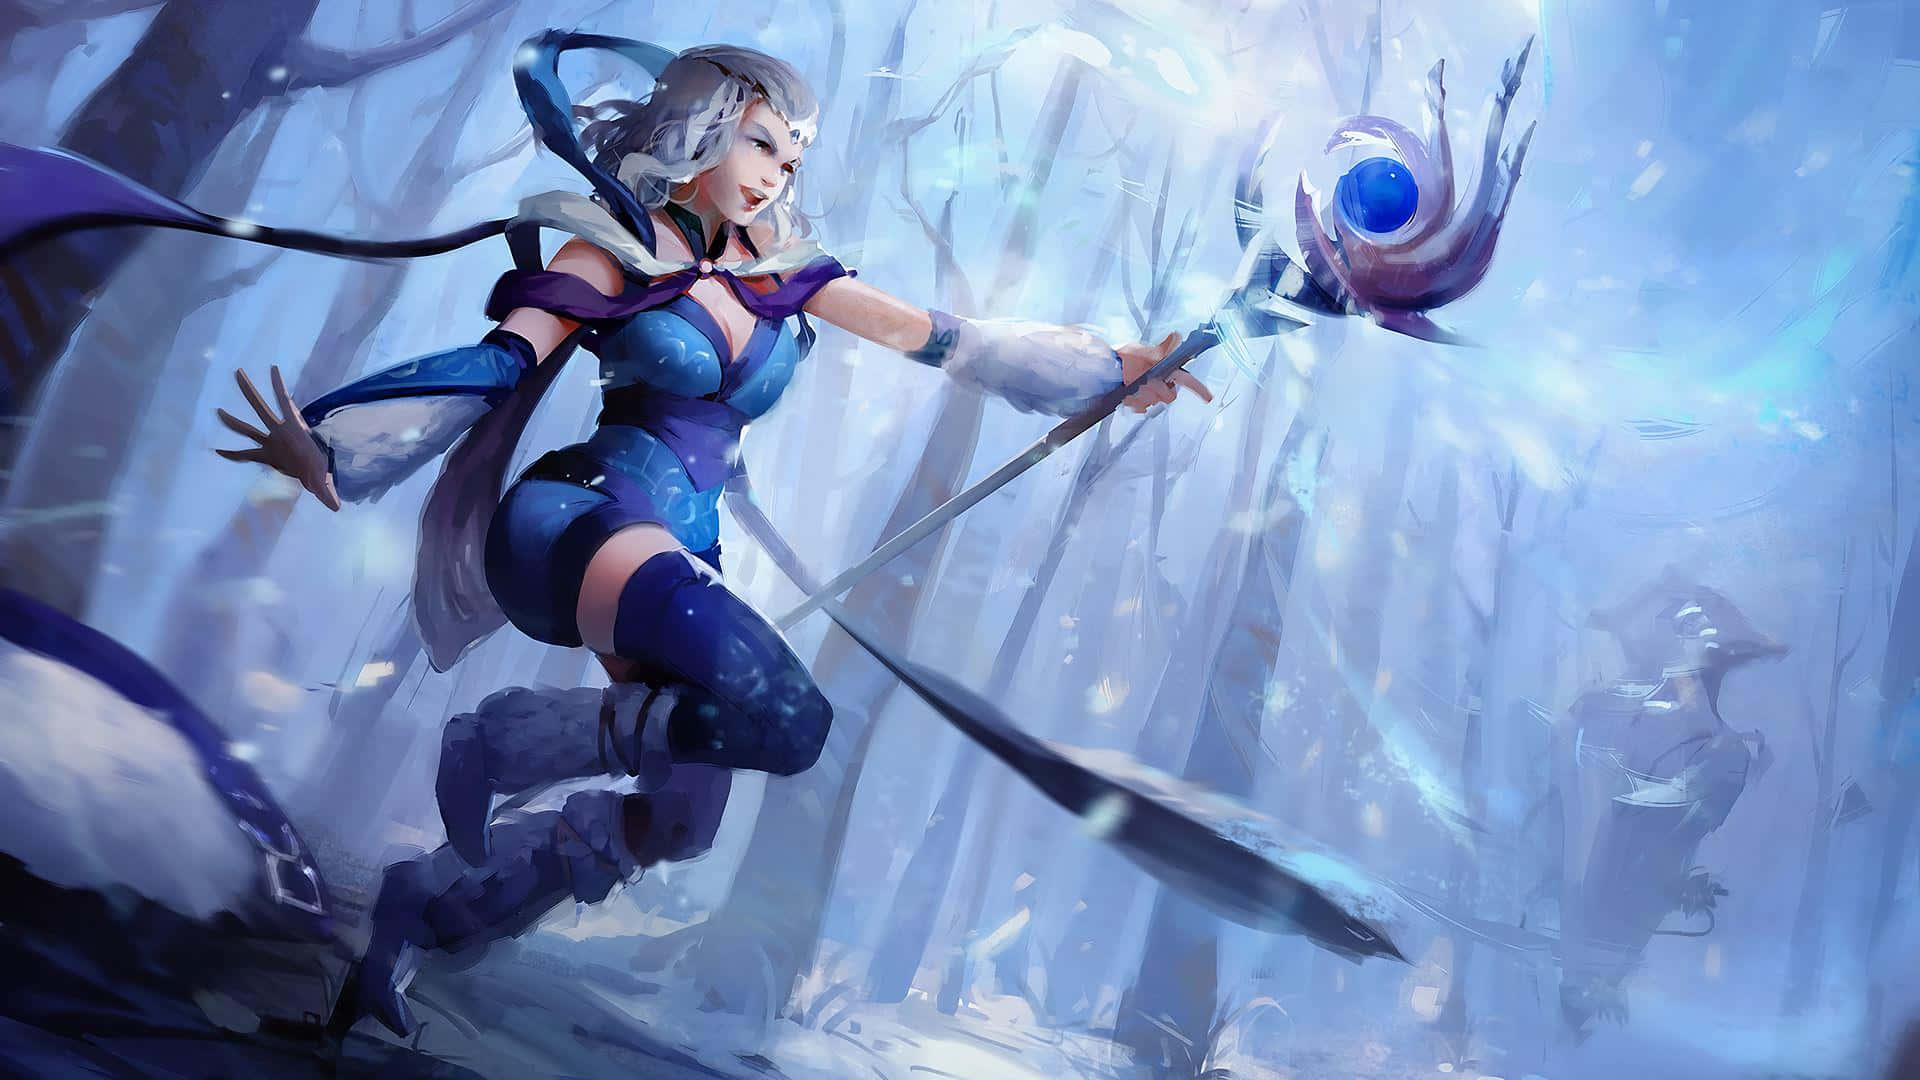 Crystal Maiden Unleashing her Powers in the Snow Wallpaper